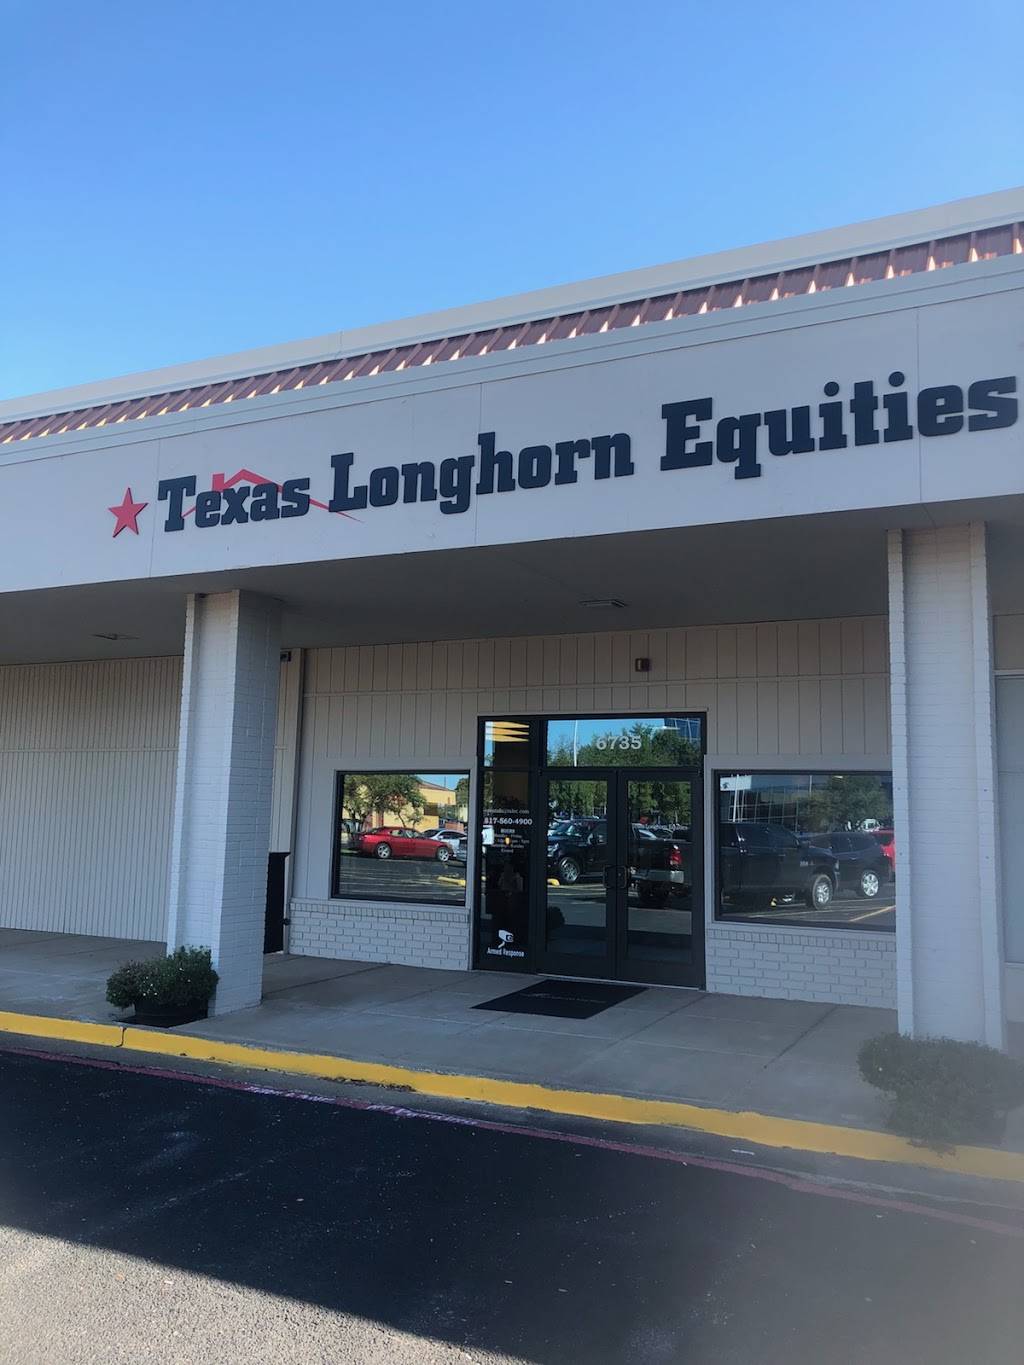 Texas Longhorn Equities - Property Management 6735 Camp Bowie Blvd Fort Worth Tx 76116 Usa